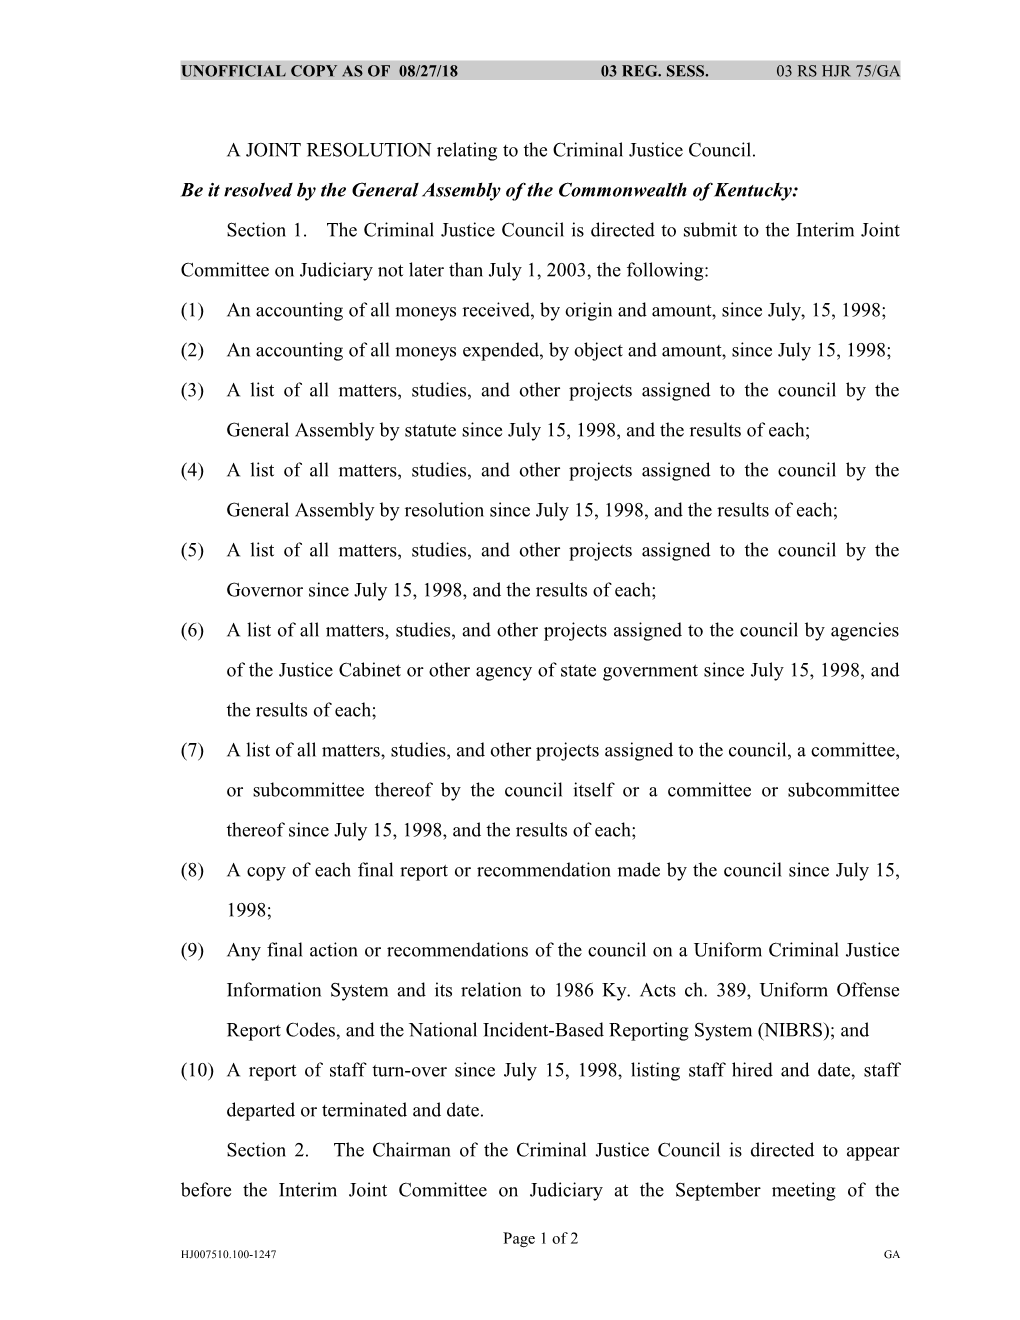 A JOINT RESOLUTION Relating to the Criminal Justice Council